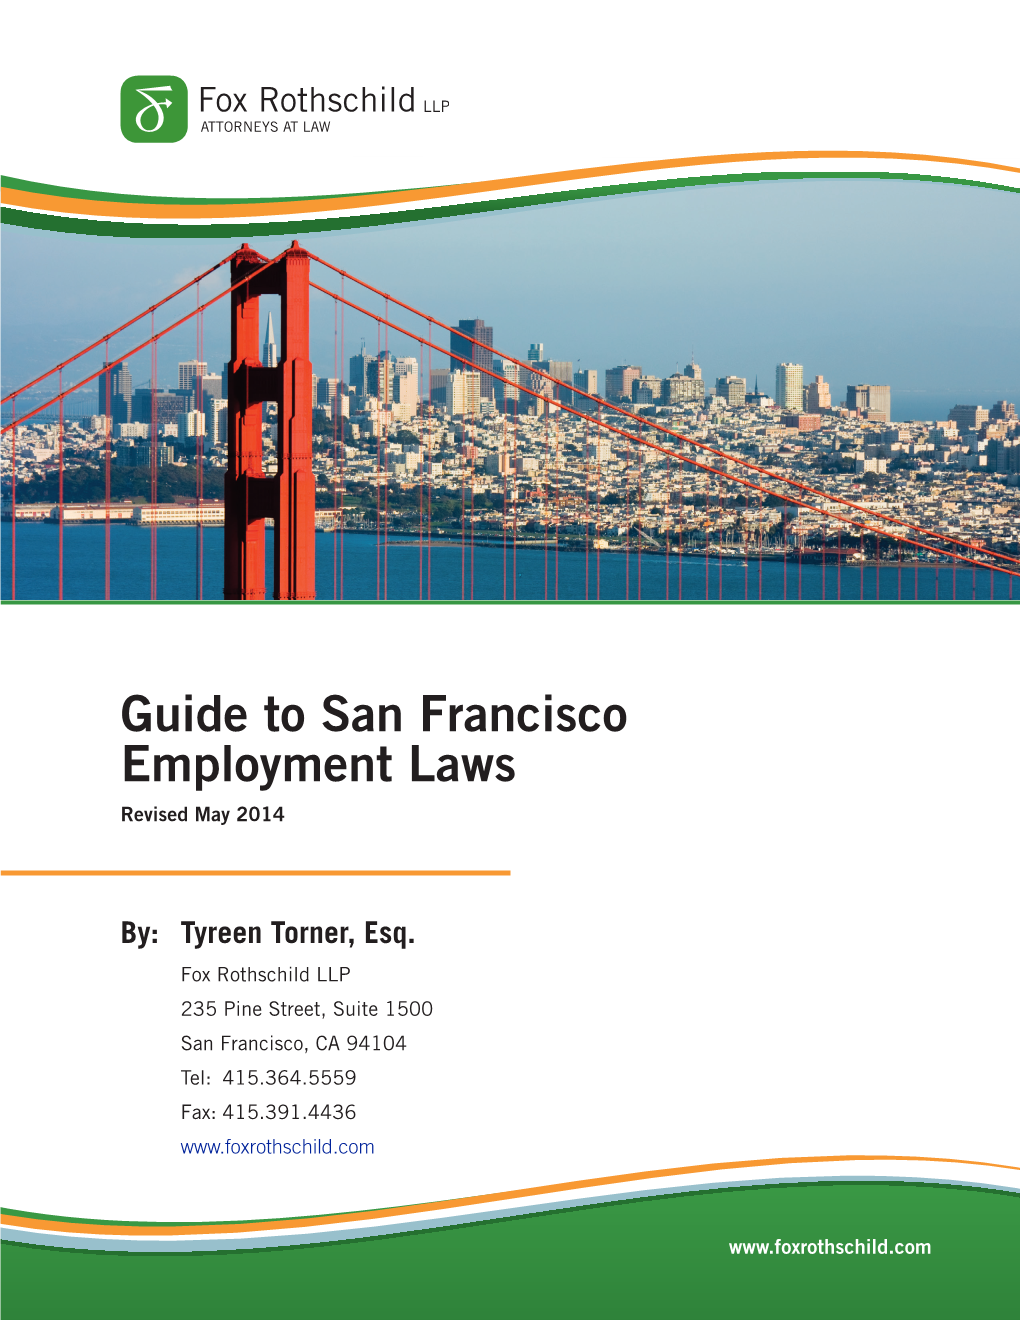 Guide to San Francisco Employment Laws Revised May 2014